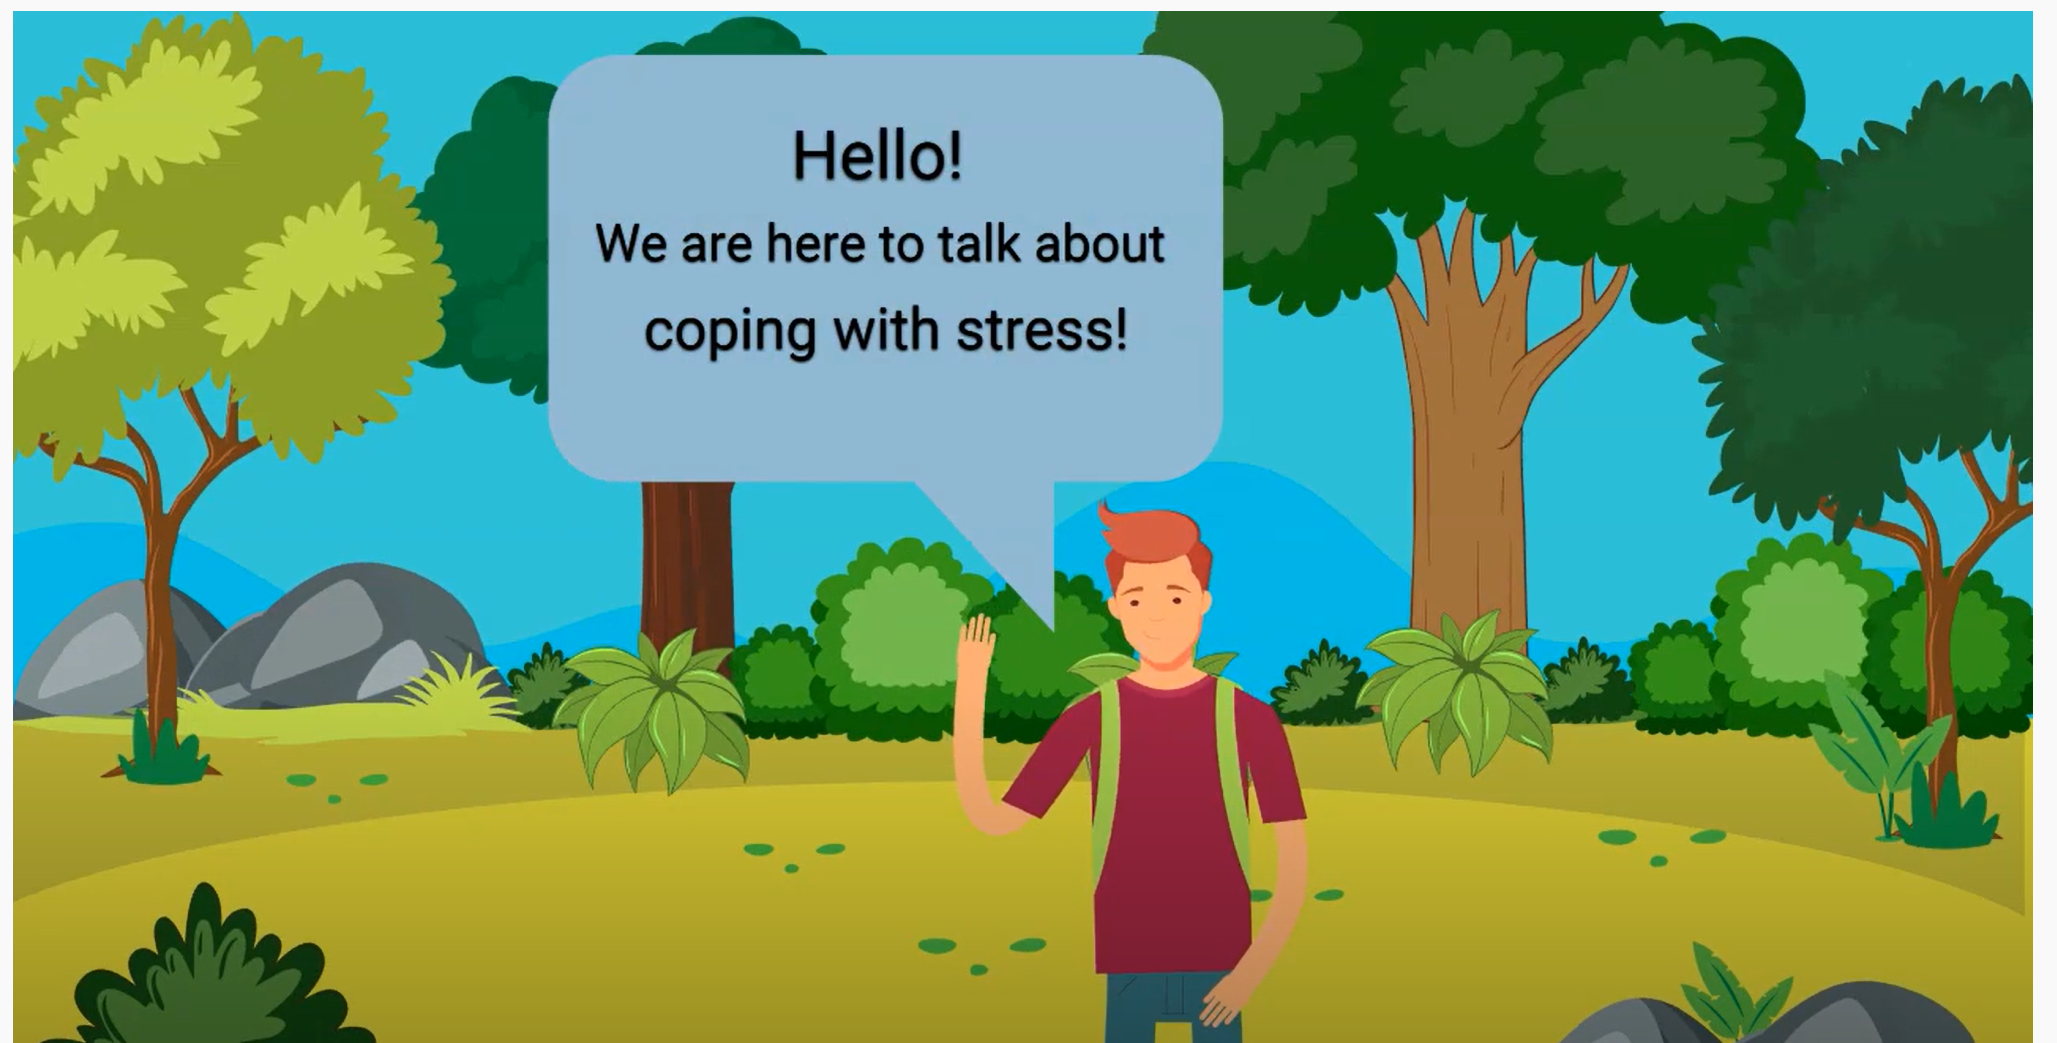 A student saying "Hello we are here to talk about coping with stress"